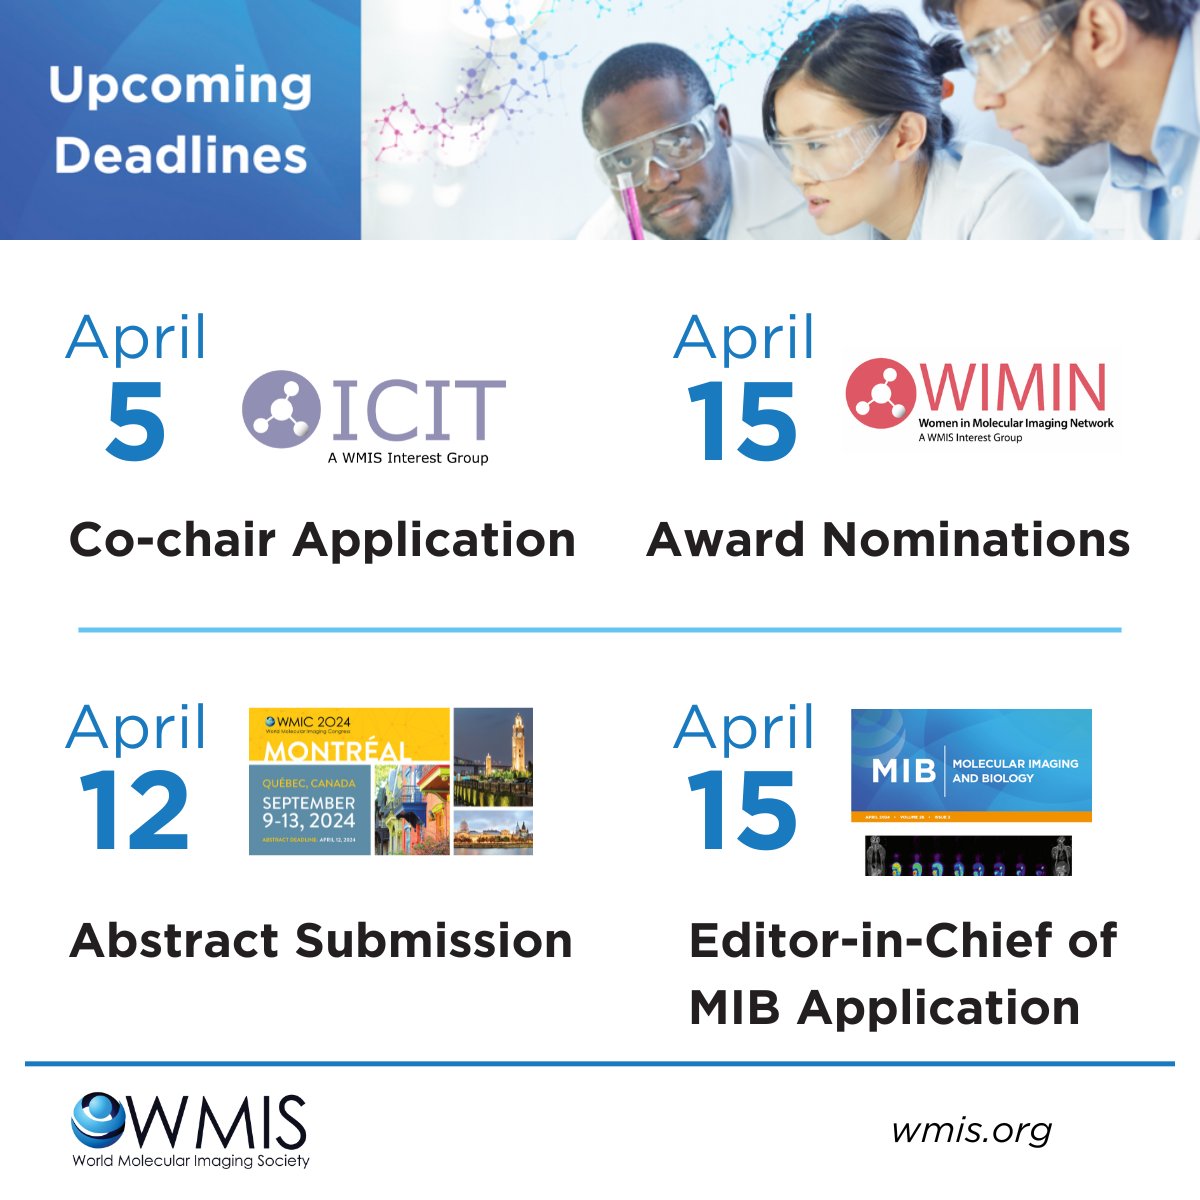 Upcoming WMIS Deadlines - Don't let these opportunities pass you by! Apply/Submit now. View all upcoming events: wmis.org/calendar-of-ev…